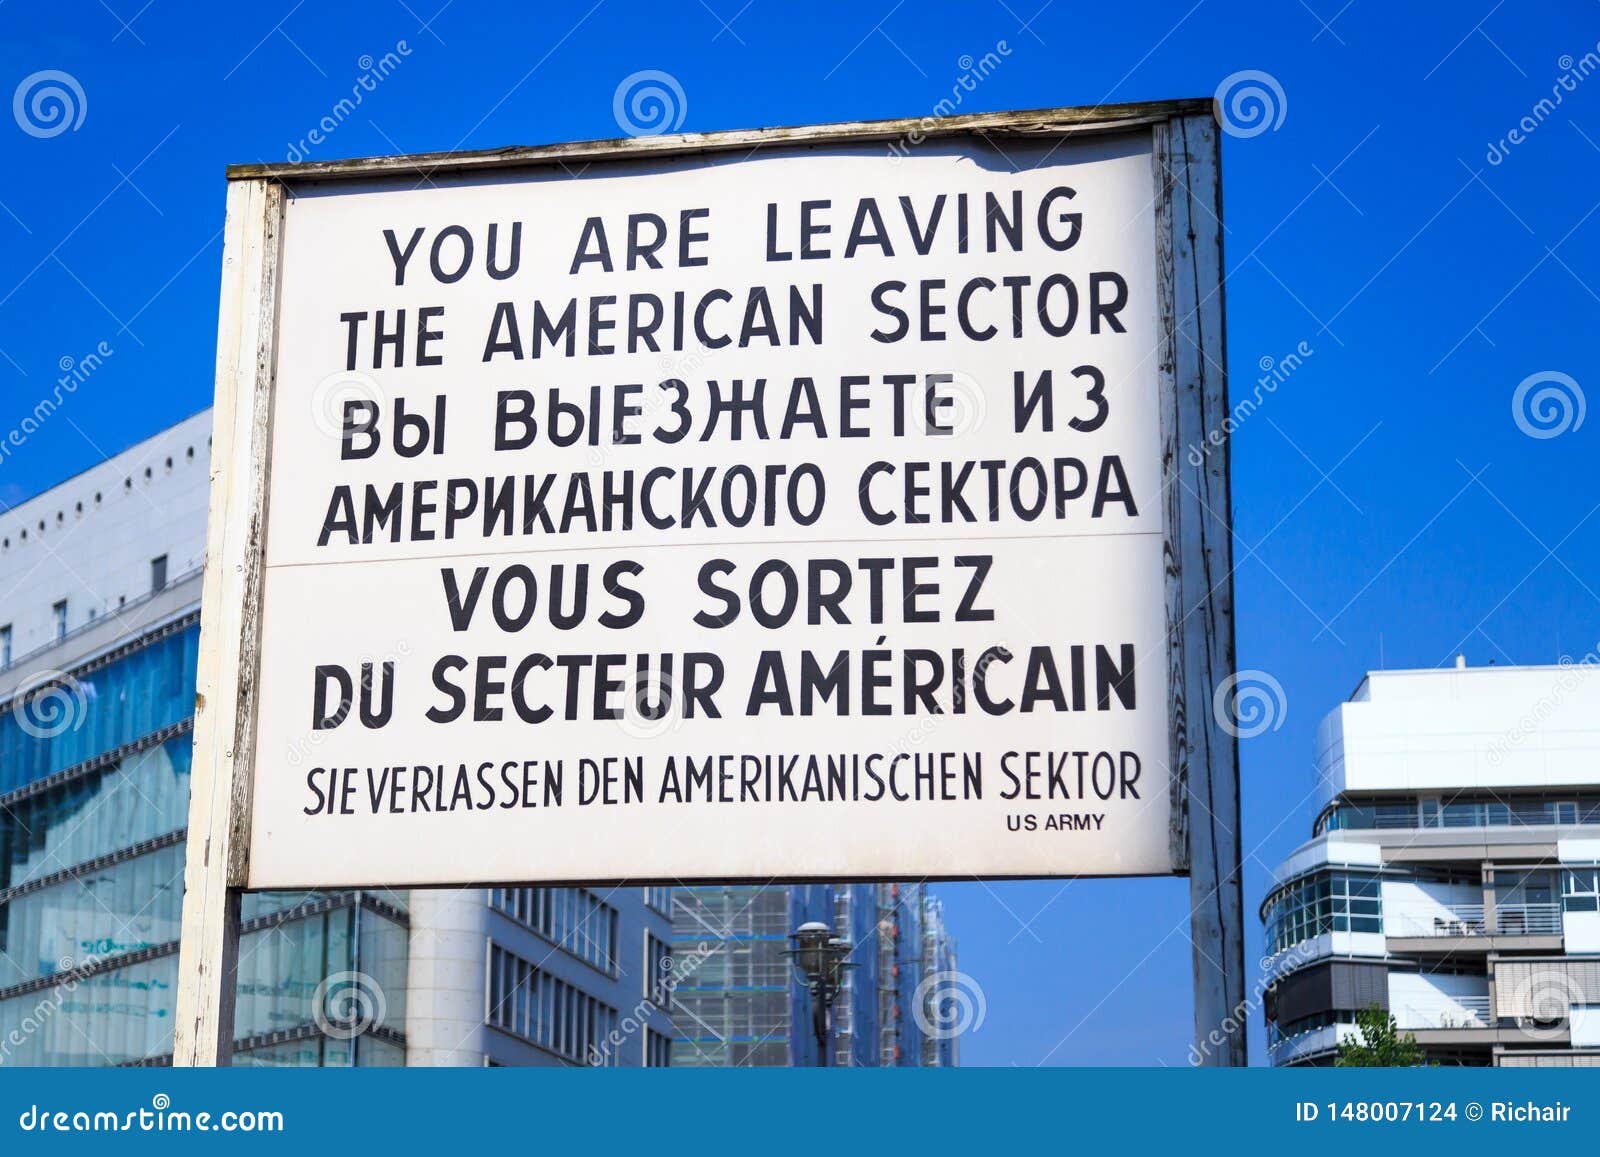 you are leaving the american sector checkpoint charlie